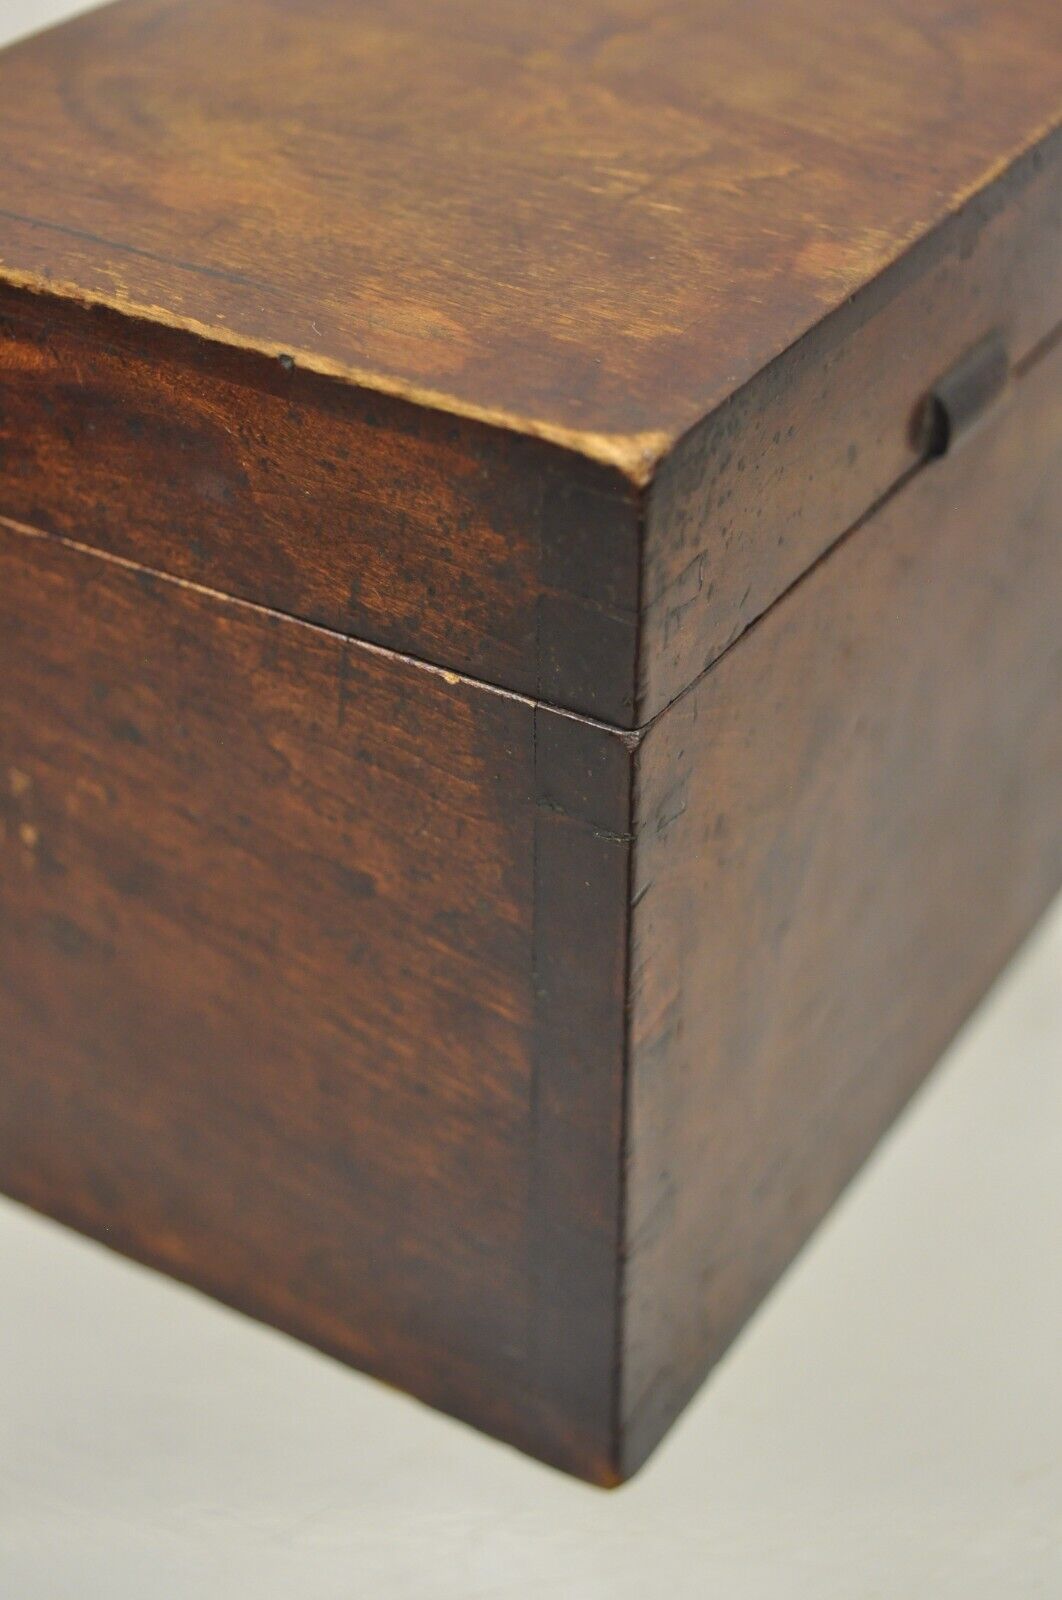 Antique English Walnut Tea Caddy Small Desk Box Victorian with Dovetail